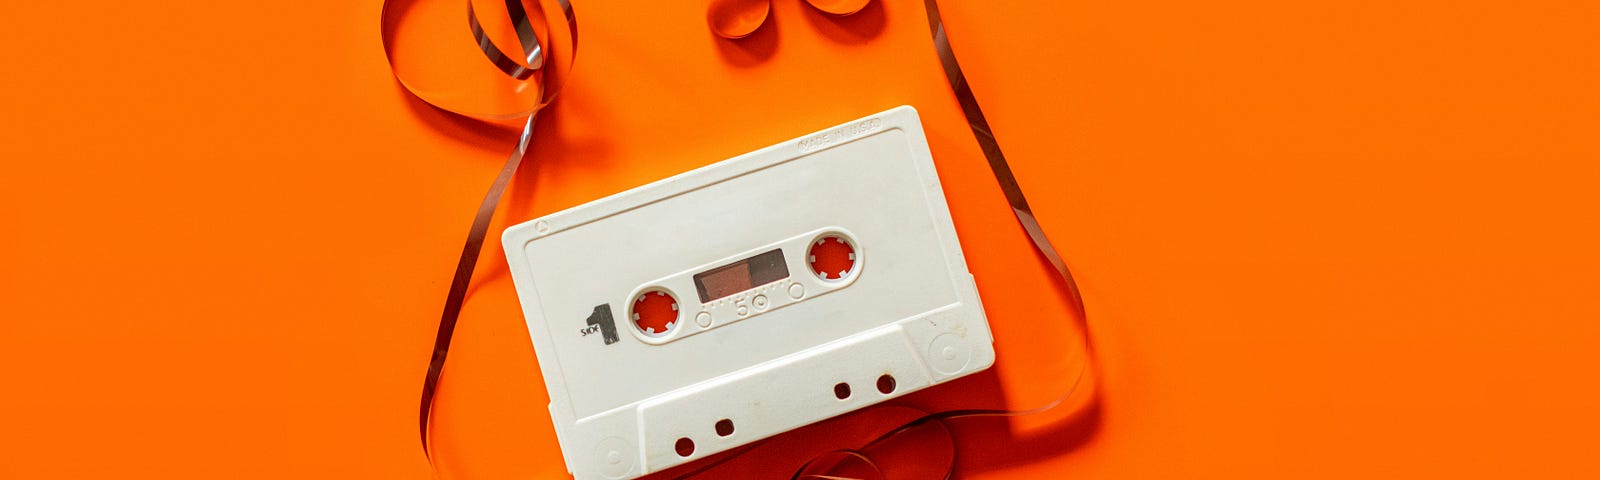 A cassette tape with unraveled tape spilling out of it against a bright orange background